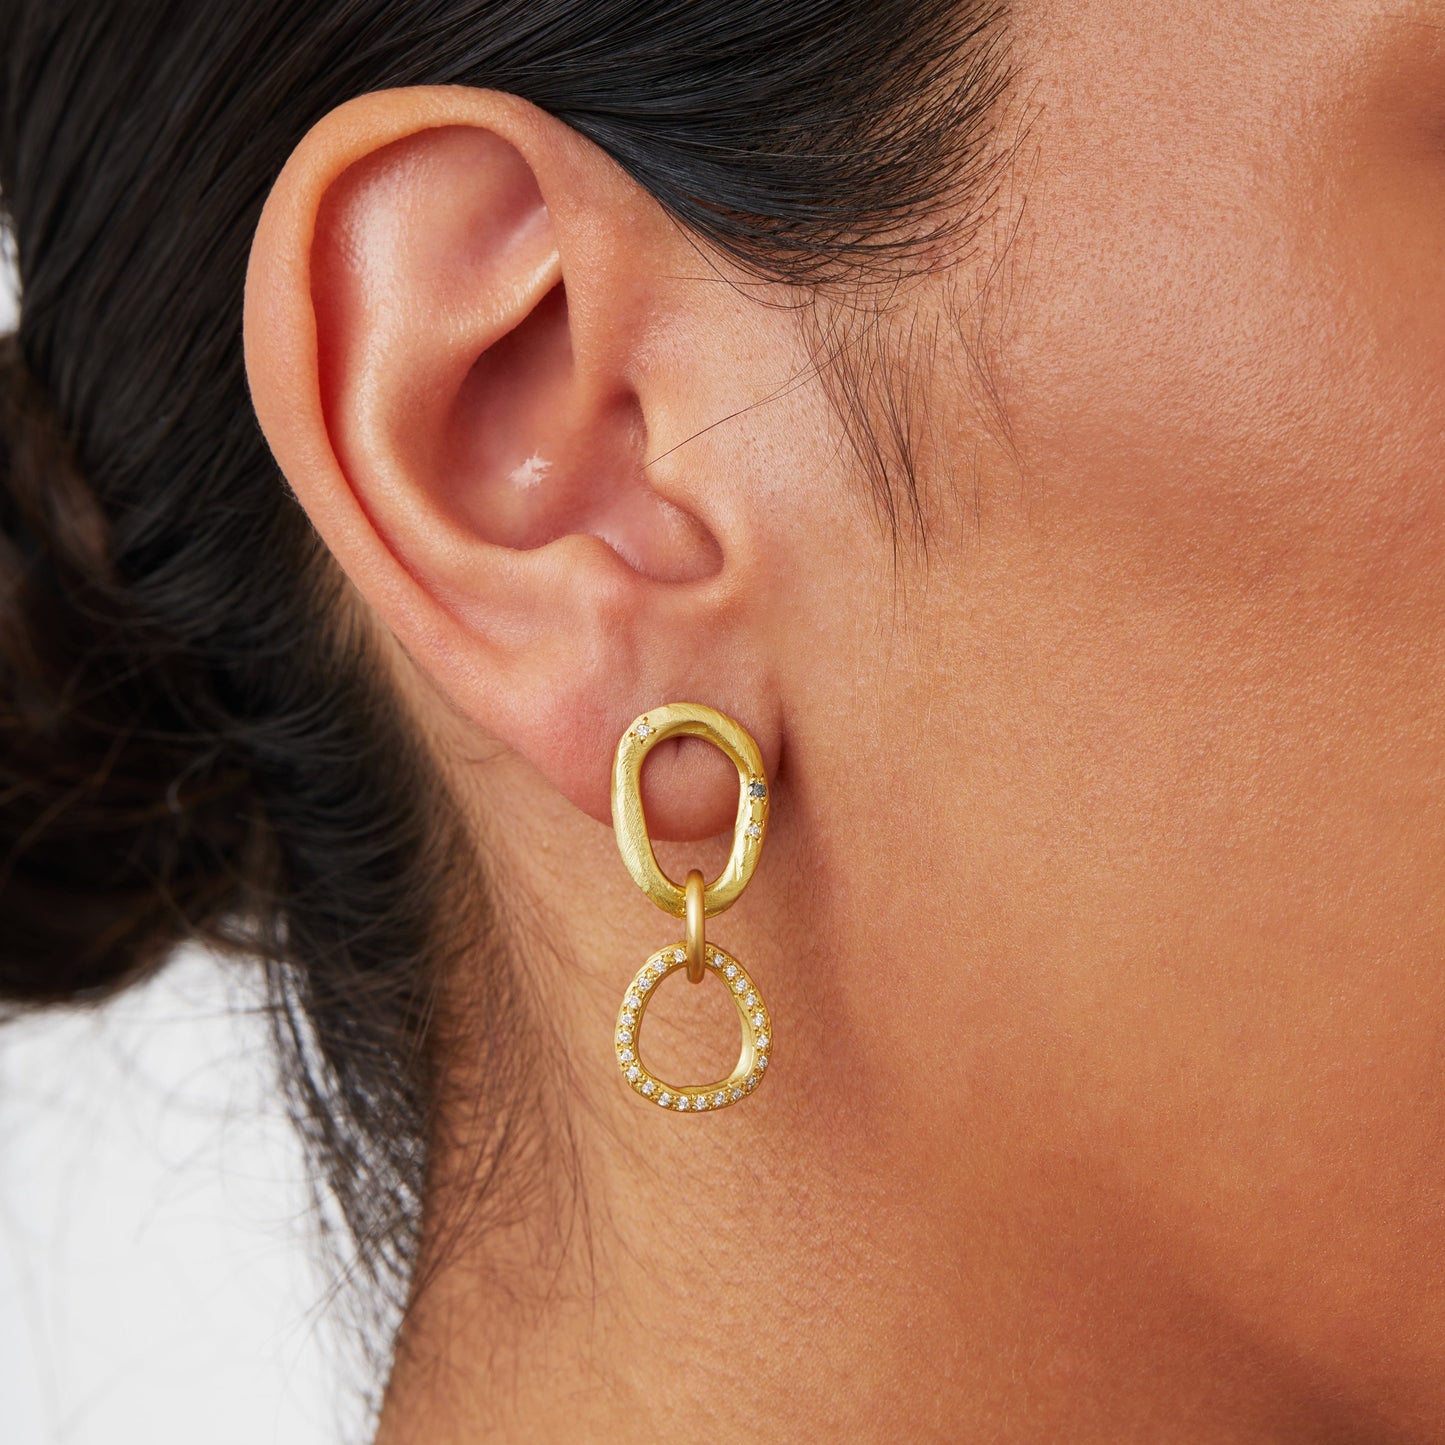 One-off Diamond Chain Link Earrings in 18ct Yellow Gold (In Stock)